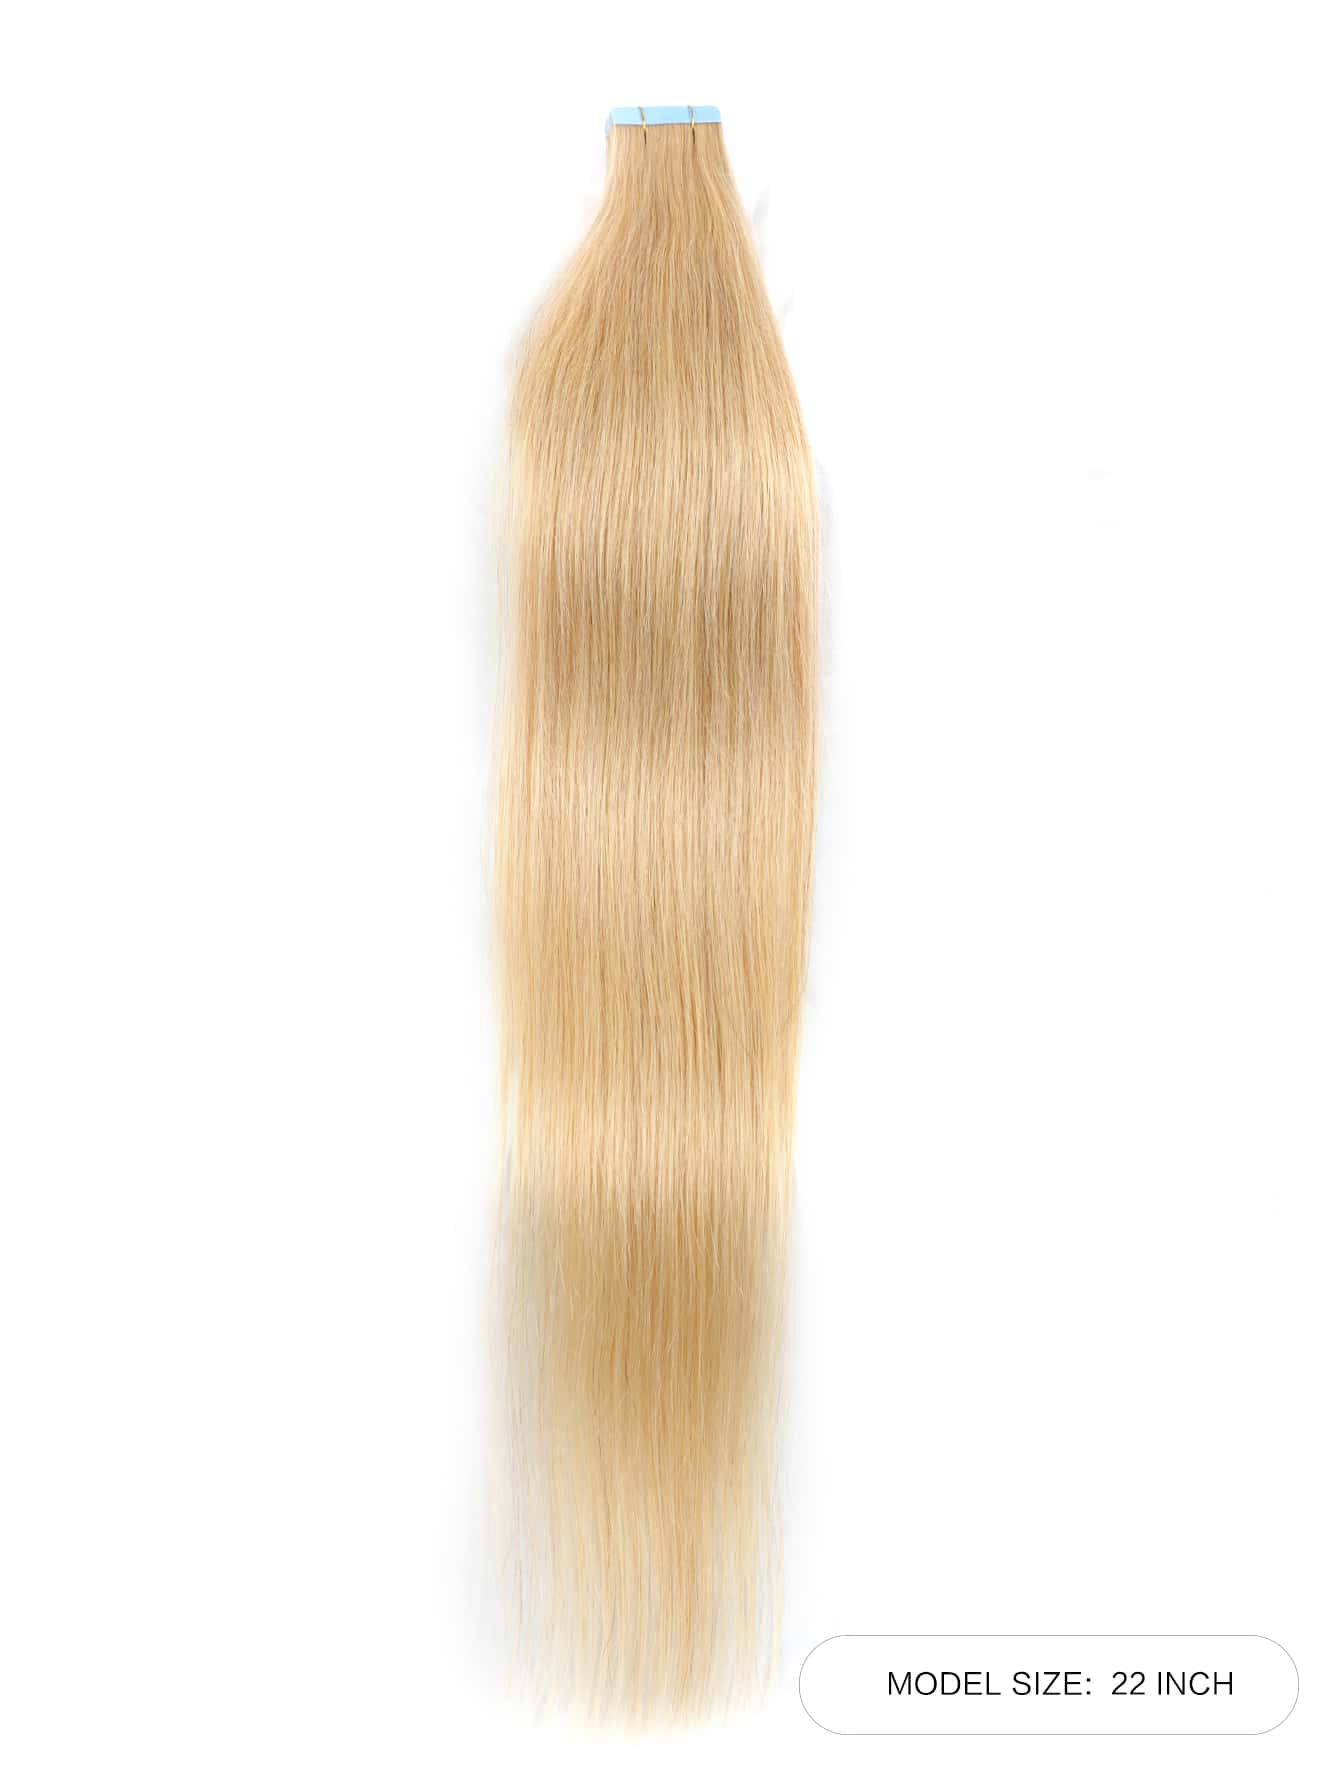 20pcs Straight Tape In 100% Human Hair Extension For Salon Silky Seamless Invisible Balayage Dirty Blonde To Highlight Bleach Blonde For Thin Hair Woman Natural Look Top Quality Highlight Color